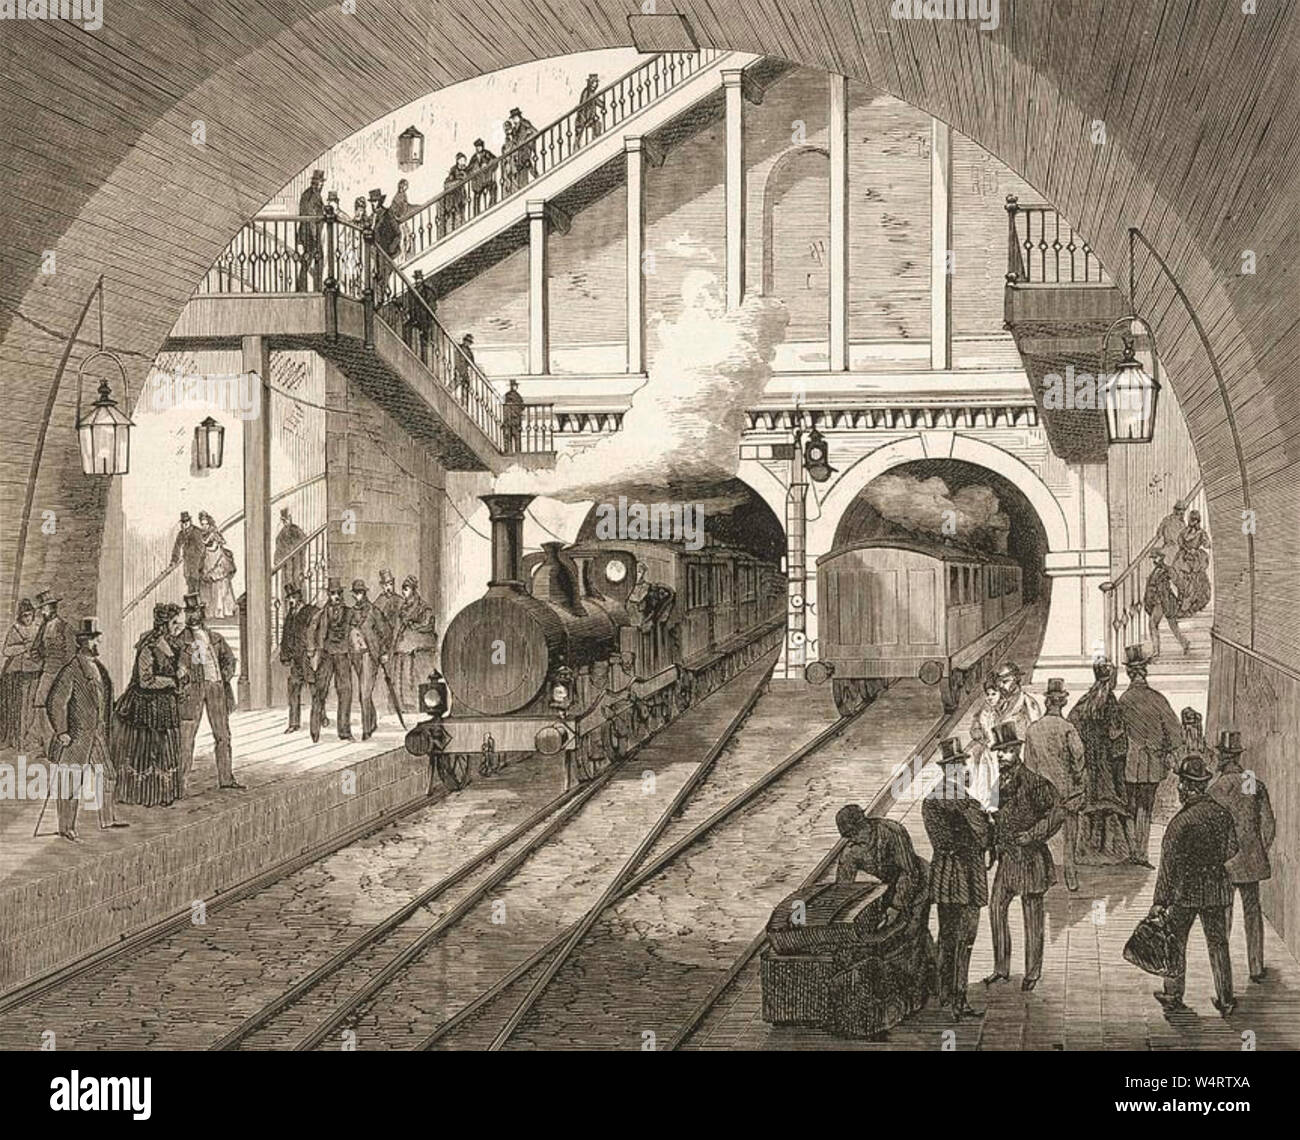 WAPPING STATION, London, about 1870 showing a steam train arriving via the Thames Tunnel Stock Photo